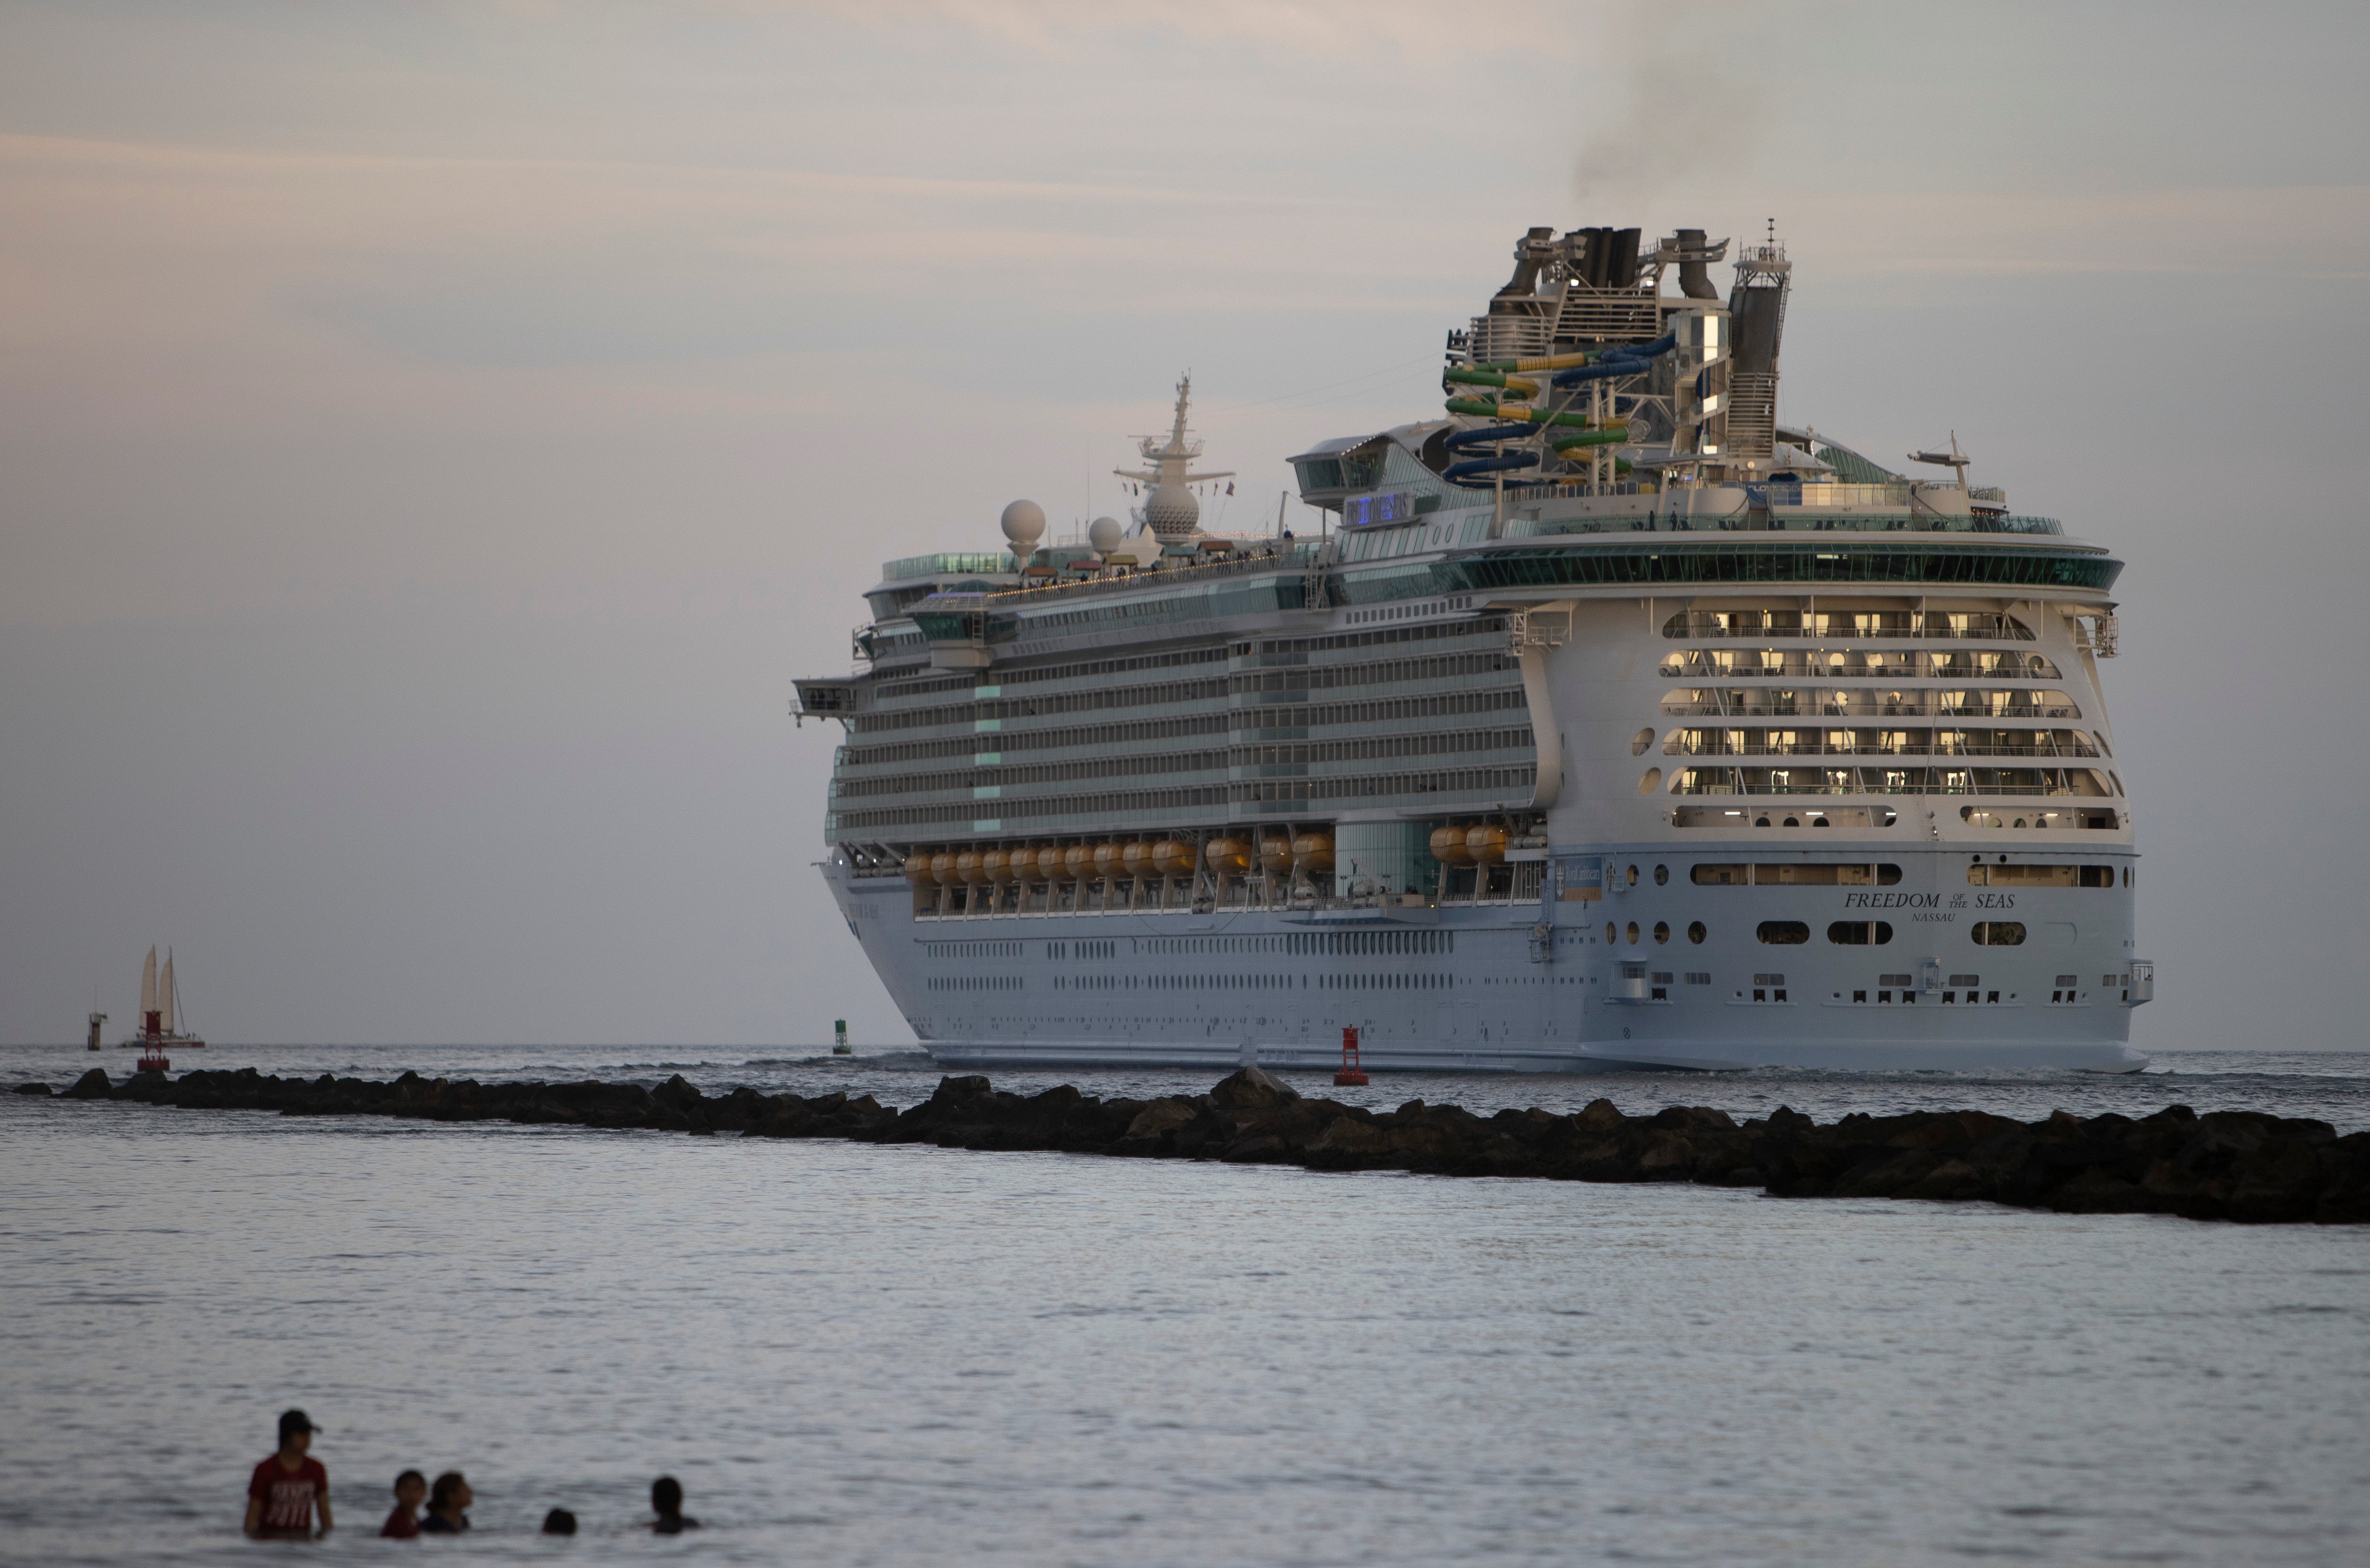 Six passengers onboard a Royal Caribbean Cruis ship have tested positive for Covid-19